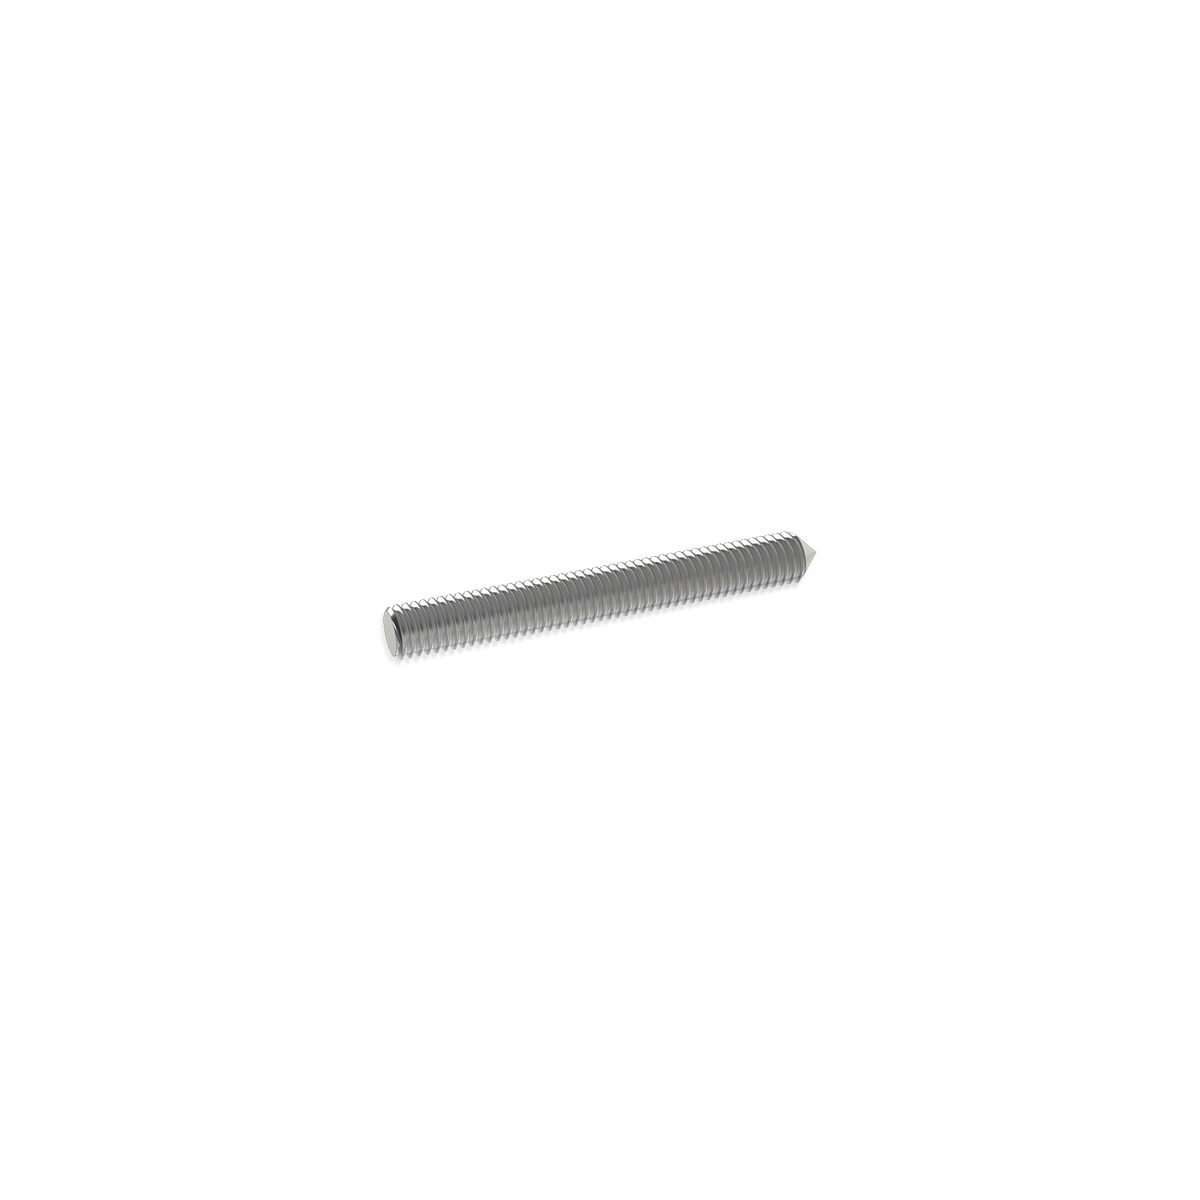 Threaded Hex Spacer/Standoff Female, 1/2 x 1/4-20 x Available in Many  Lengths by Metal Spacers Online (1 Length, 2)